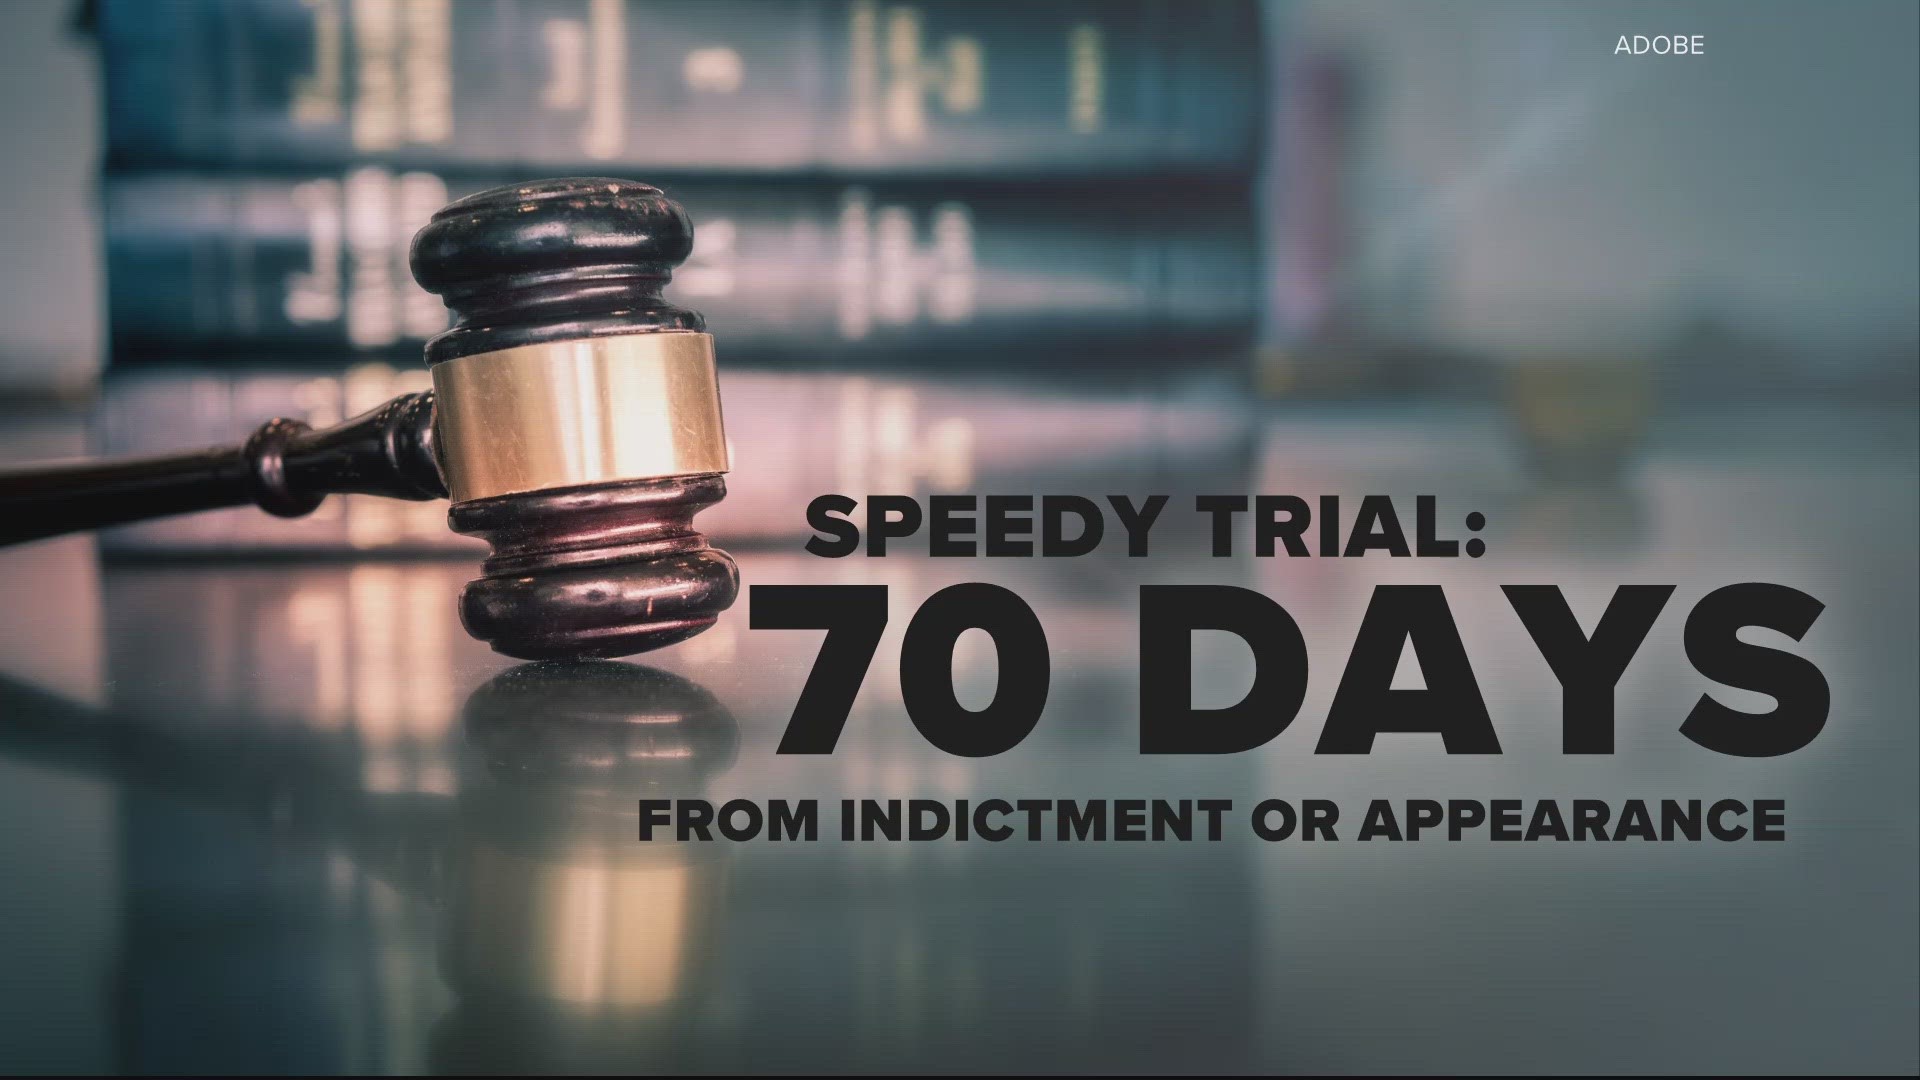 A speedy trial has a legal definition. Here's a closer look.